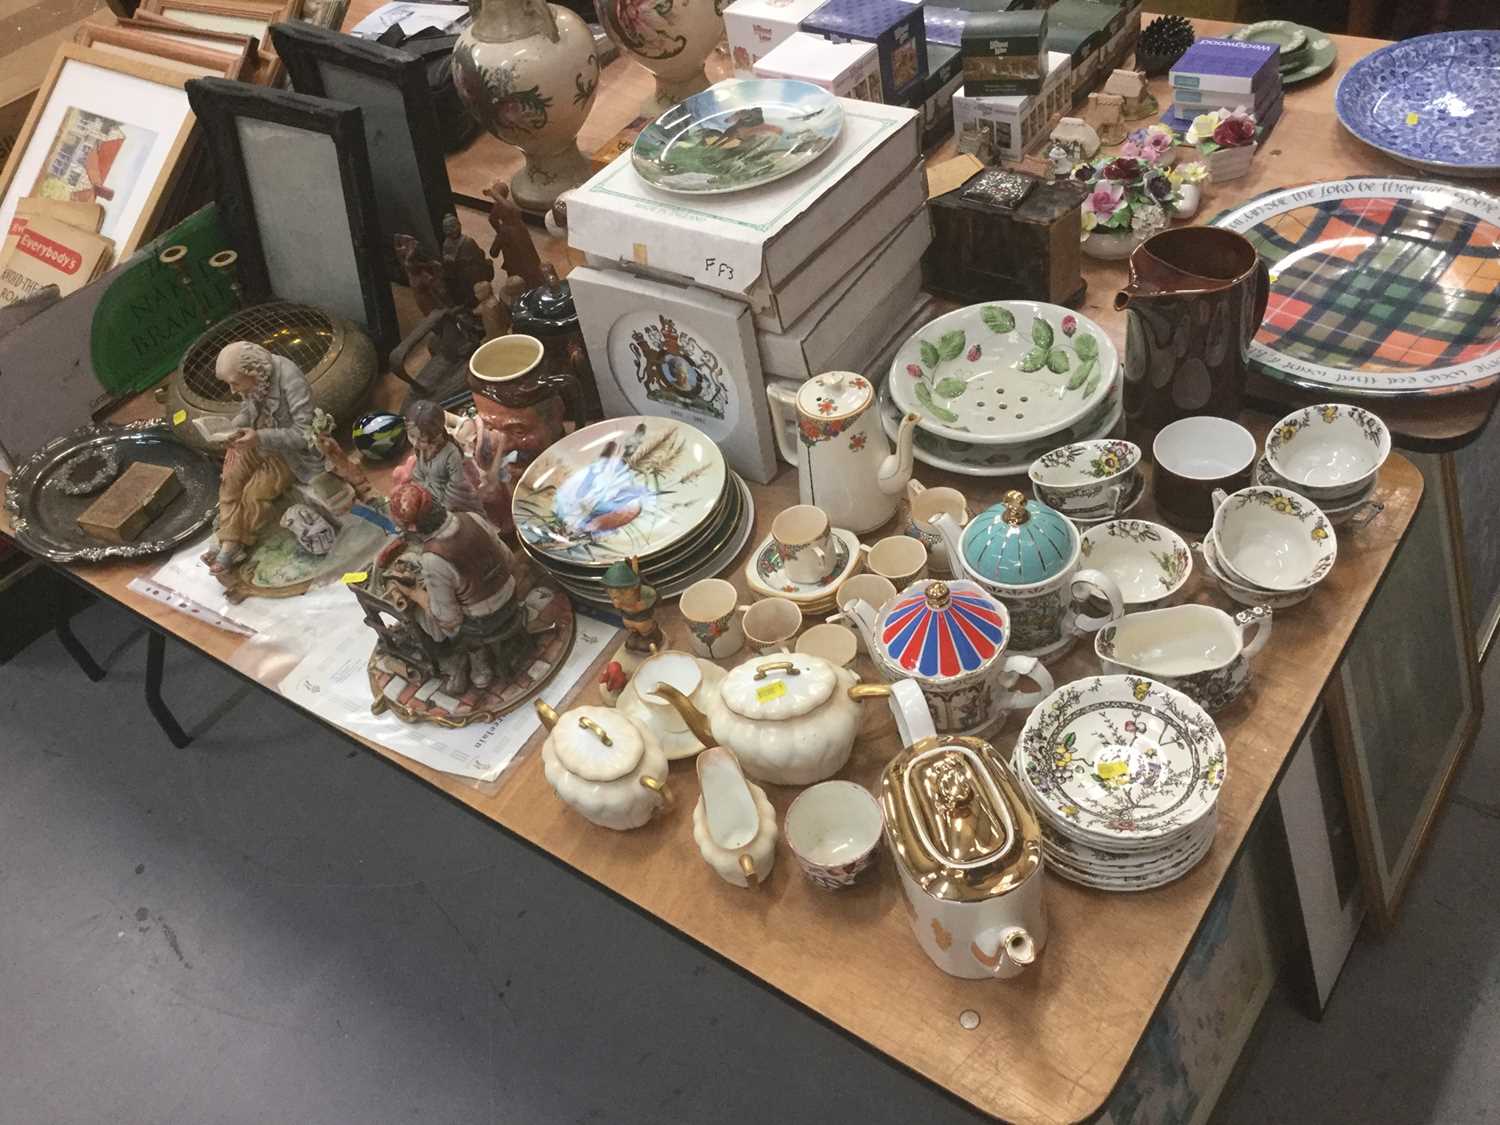 Lot 44 - Group of Lilliput Lane cottages, Wedgwood, Royal Doulton and other ceramics and sundry items